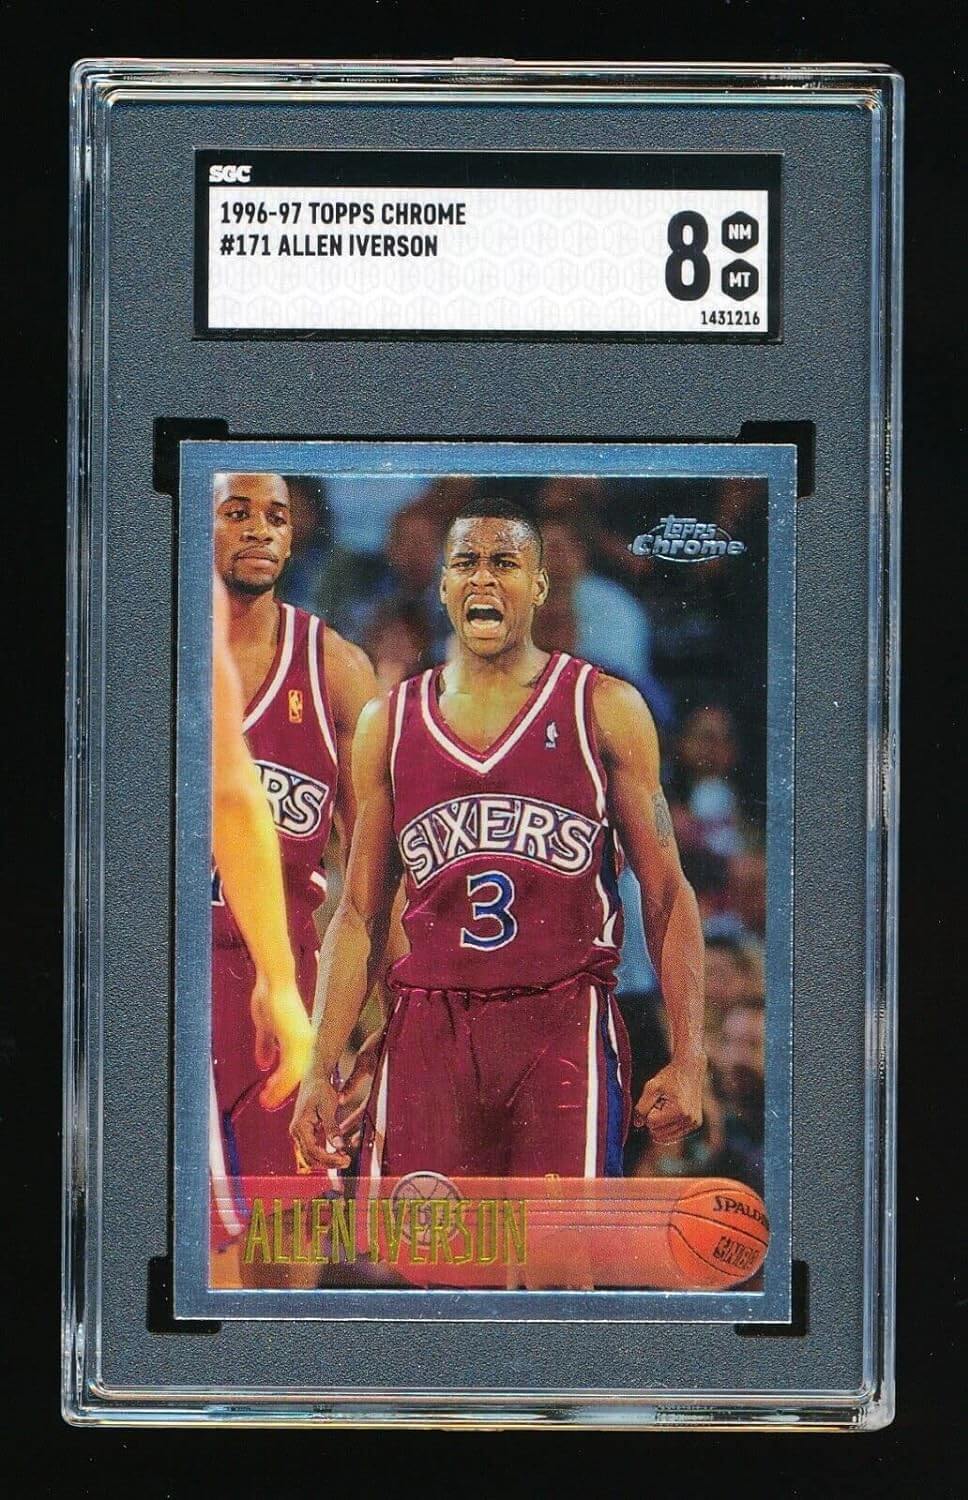 1996 Topps Chrome Refractor Allen Iverson Rookie Card